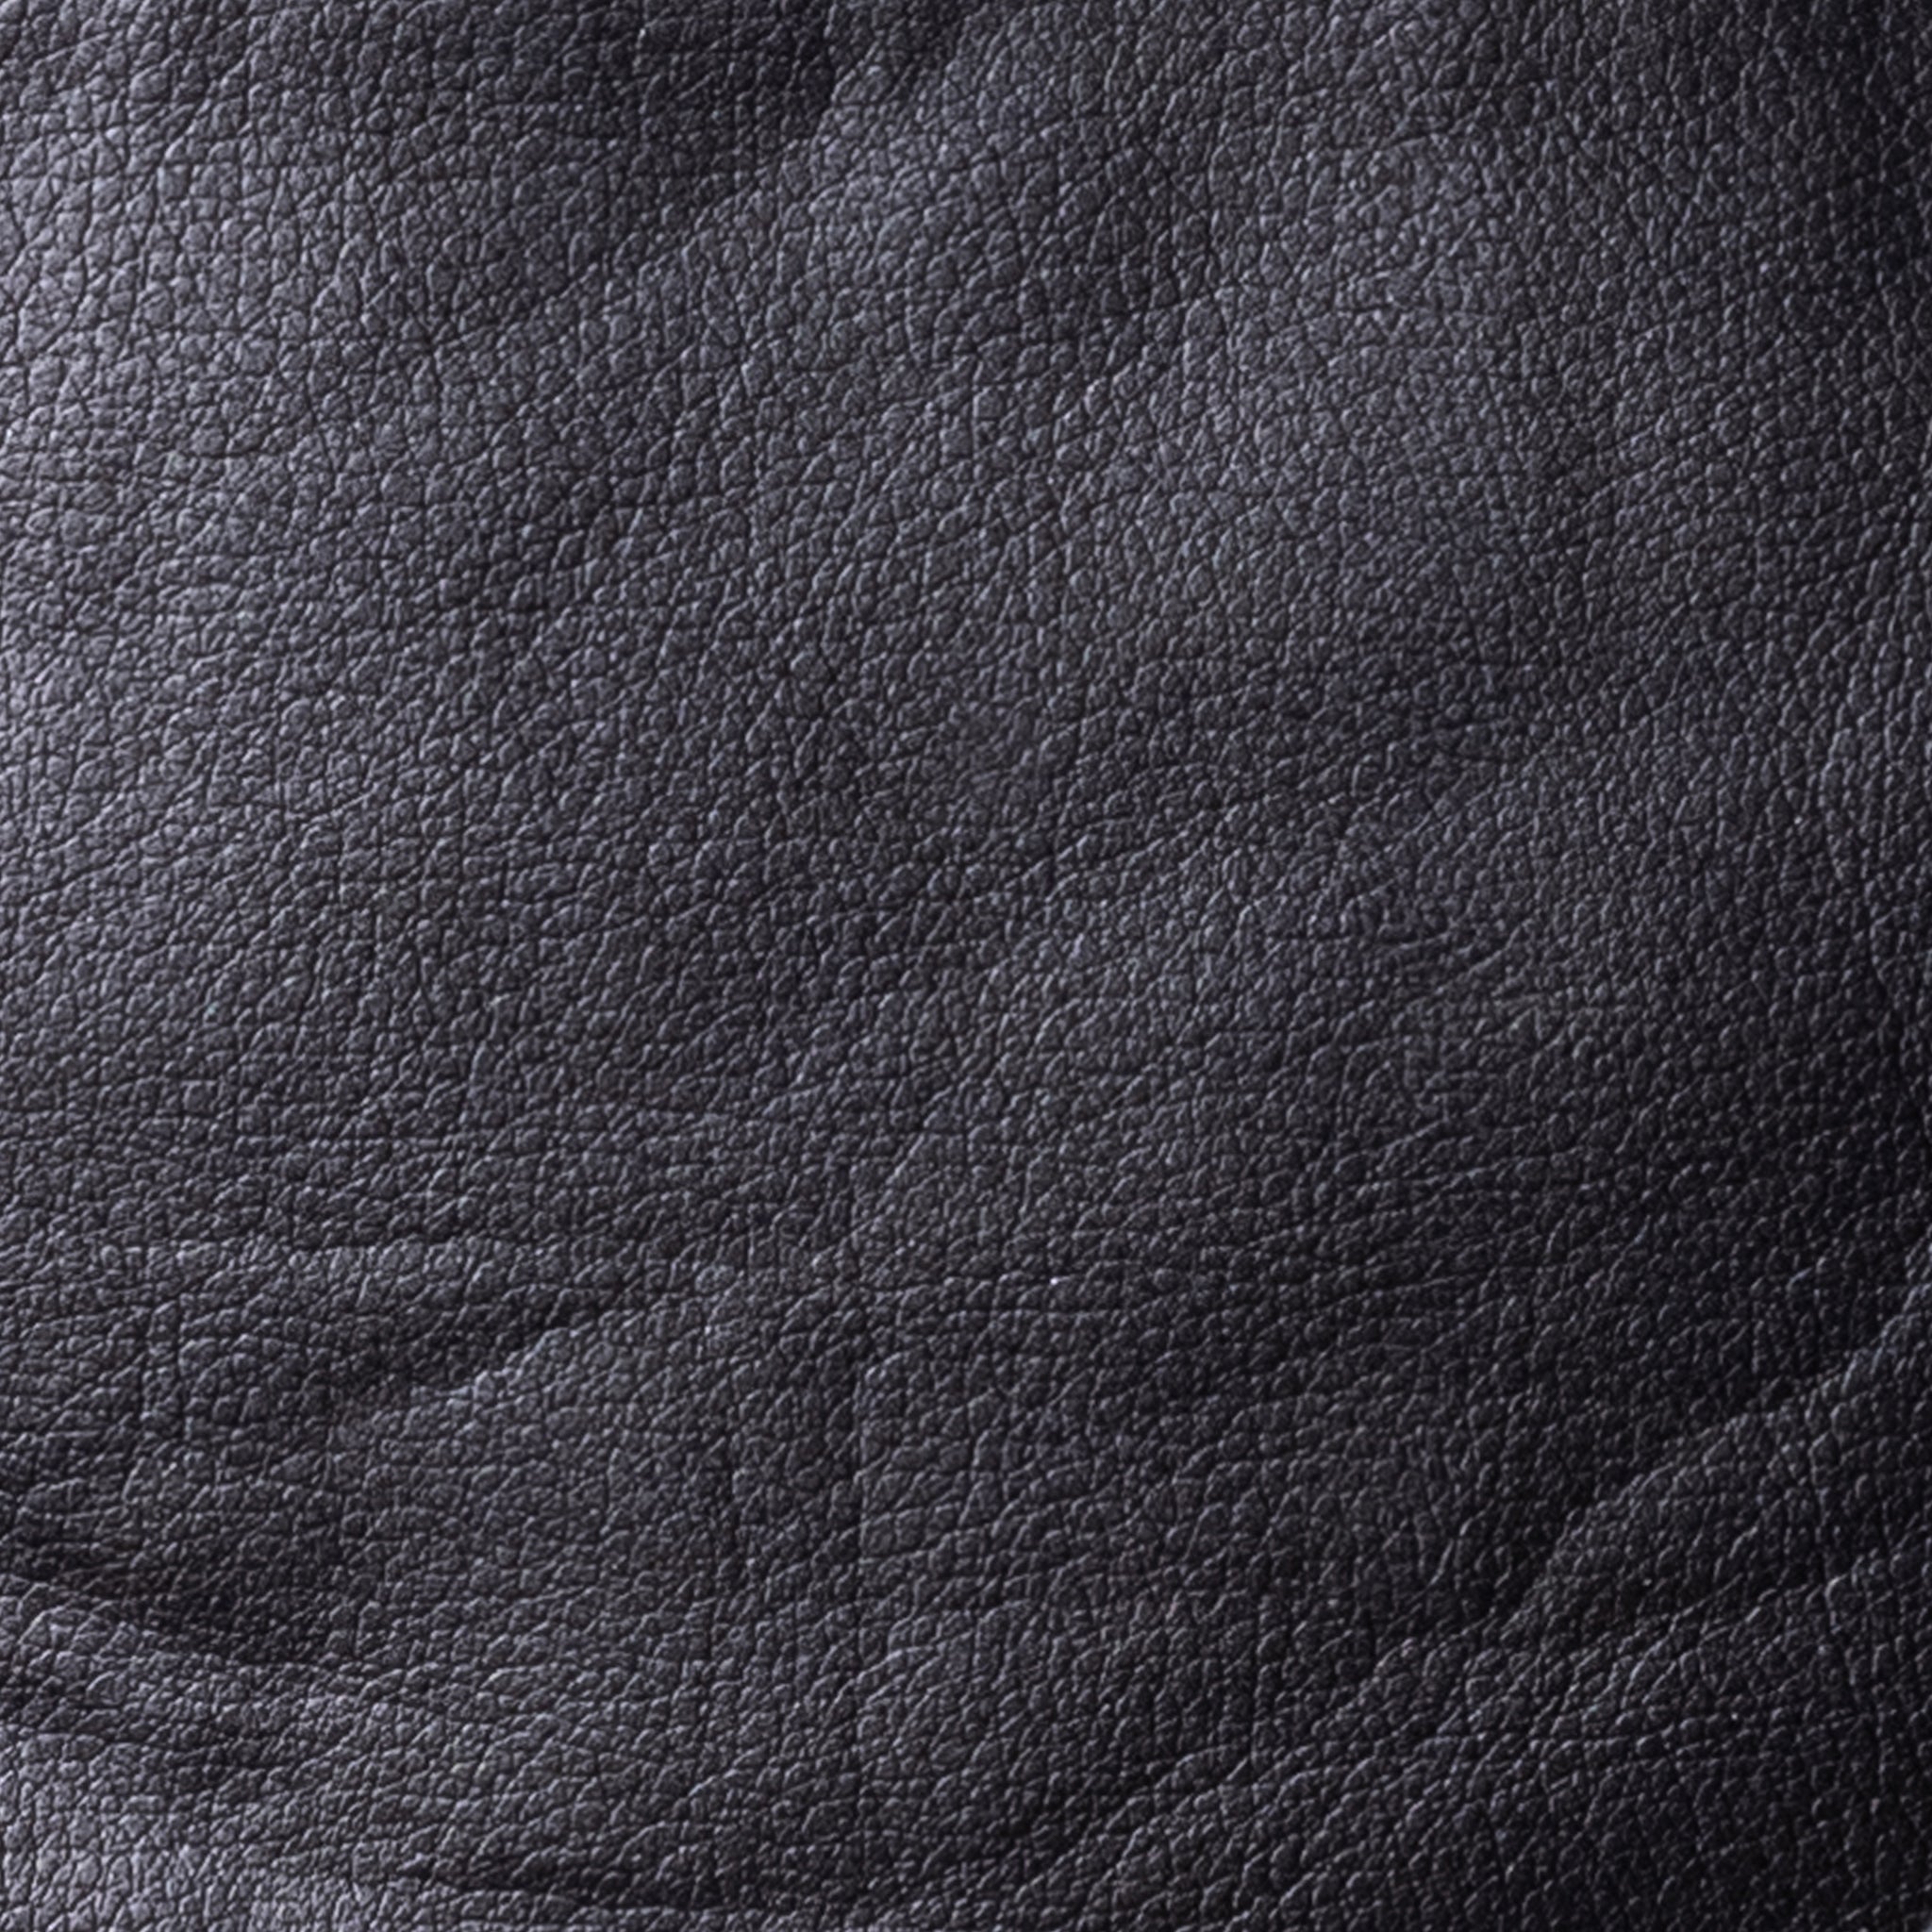 Texture of the Brittany Pinatex Backpack in Black by Duffle&Co